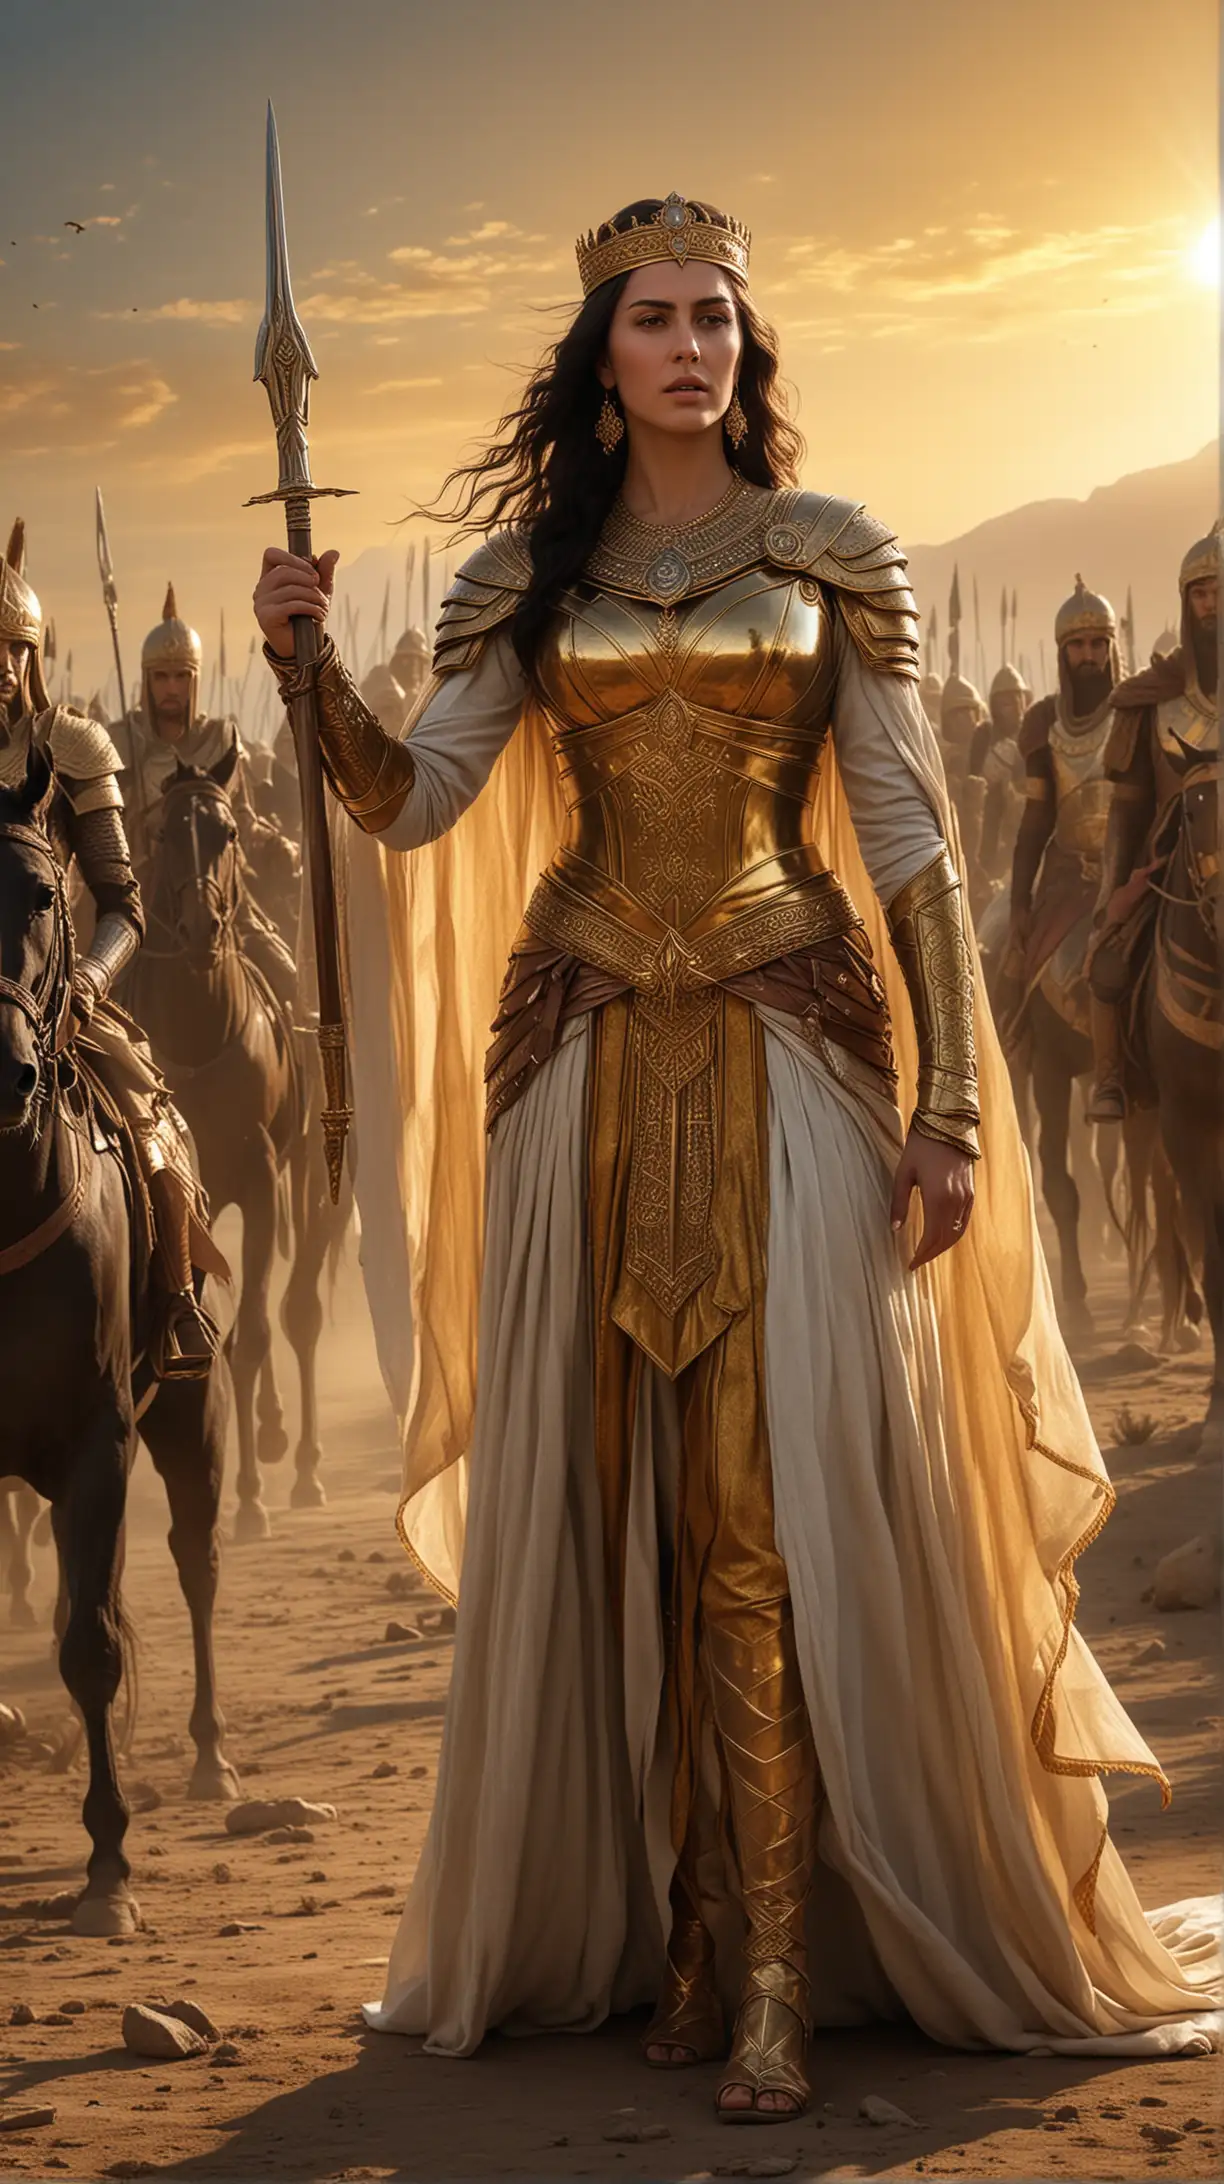 Create an image capturing the legendary Queen Tomyris standing proudly on the battlefield, surrounded by her fierce army of Massagetae warriors. Tomyris, depicted in regal attire, exudes strength and wisdom as she gazes confidently towards the horizon. Her hand gestures assertively, symbolizing her determination to defend her kingdom against the Persian invaders. Behind her, the sun sets, casting a golden glow over the scene, highlighting the epic nature of her legendary battle against Cyrus the Great. Show the essence of her power, bravery, and leadership, immortalizing her as a symbol of female empowerment in history. hyper realistic